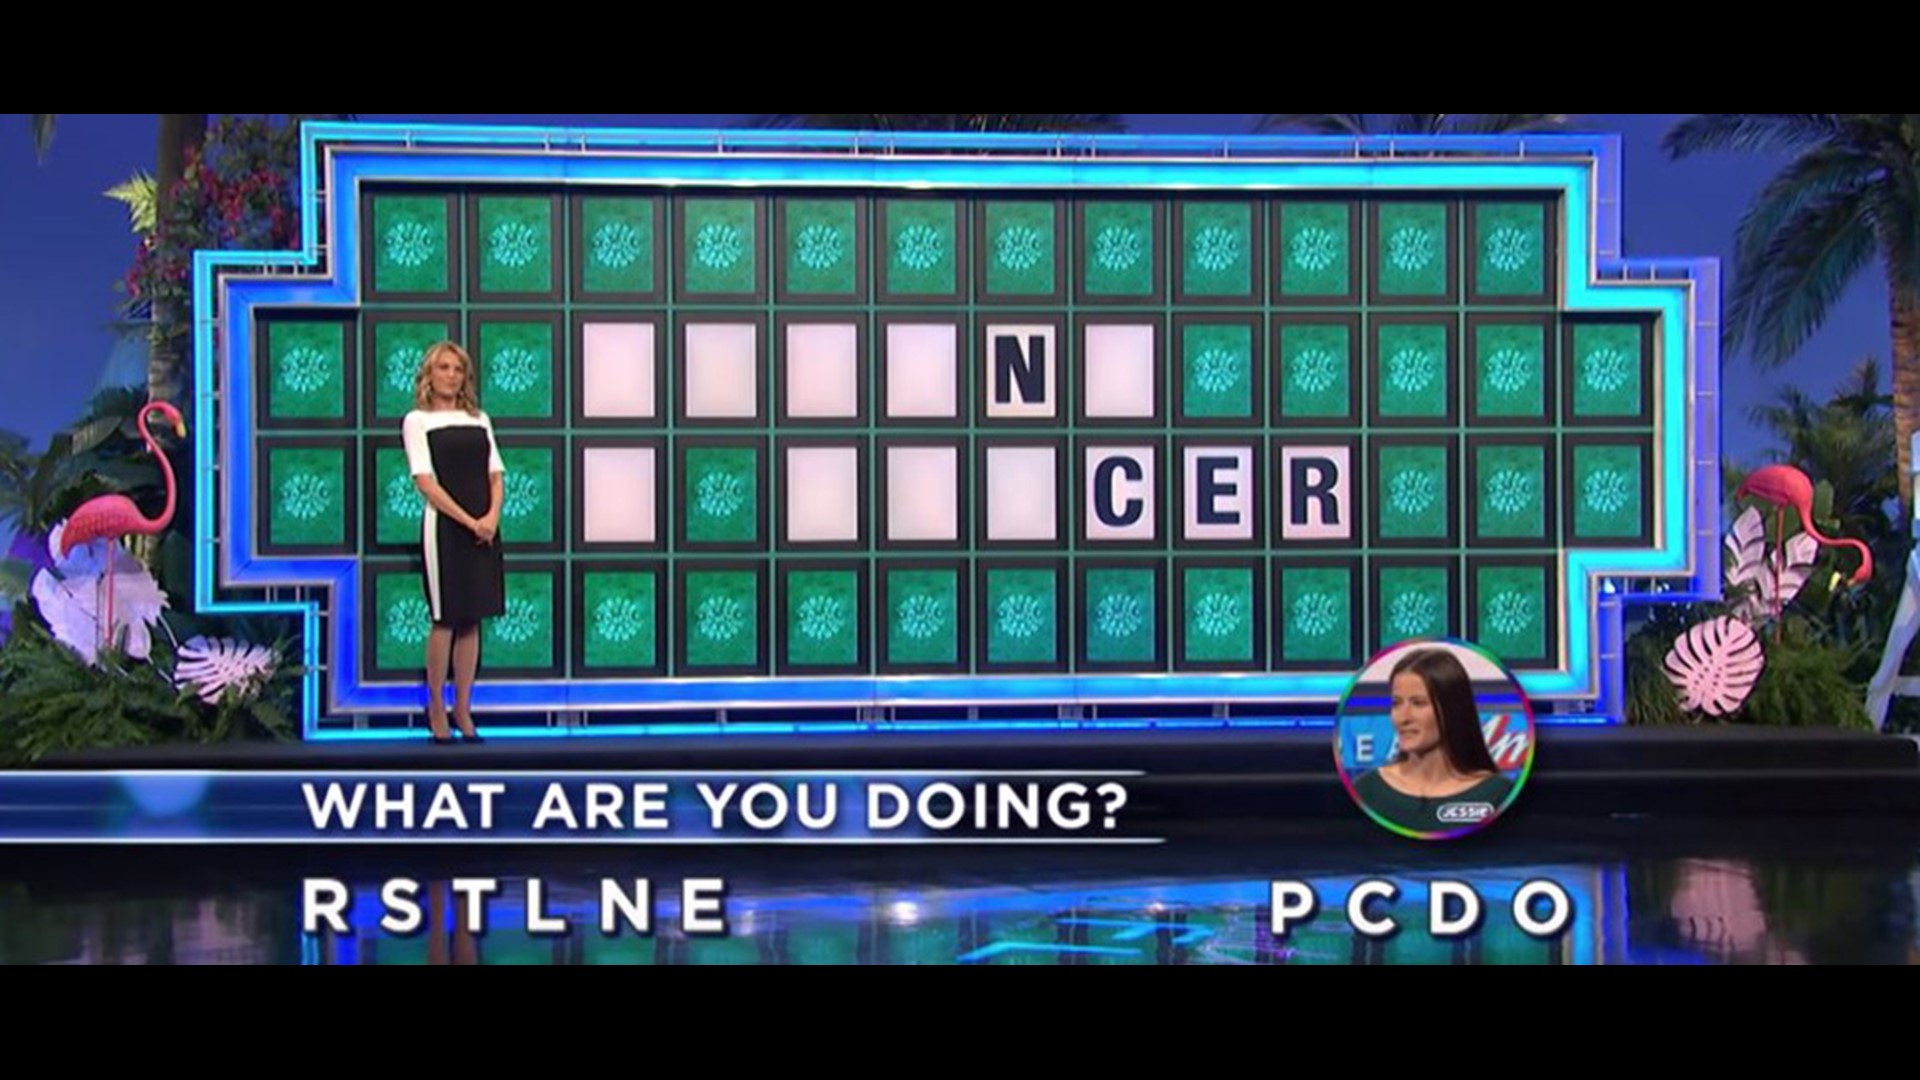 Teacher solves 'Wheel of Fortune' bonus puzzle with 4 letters. Can you